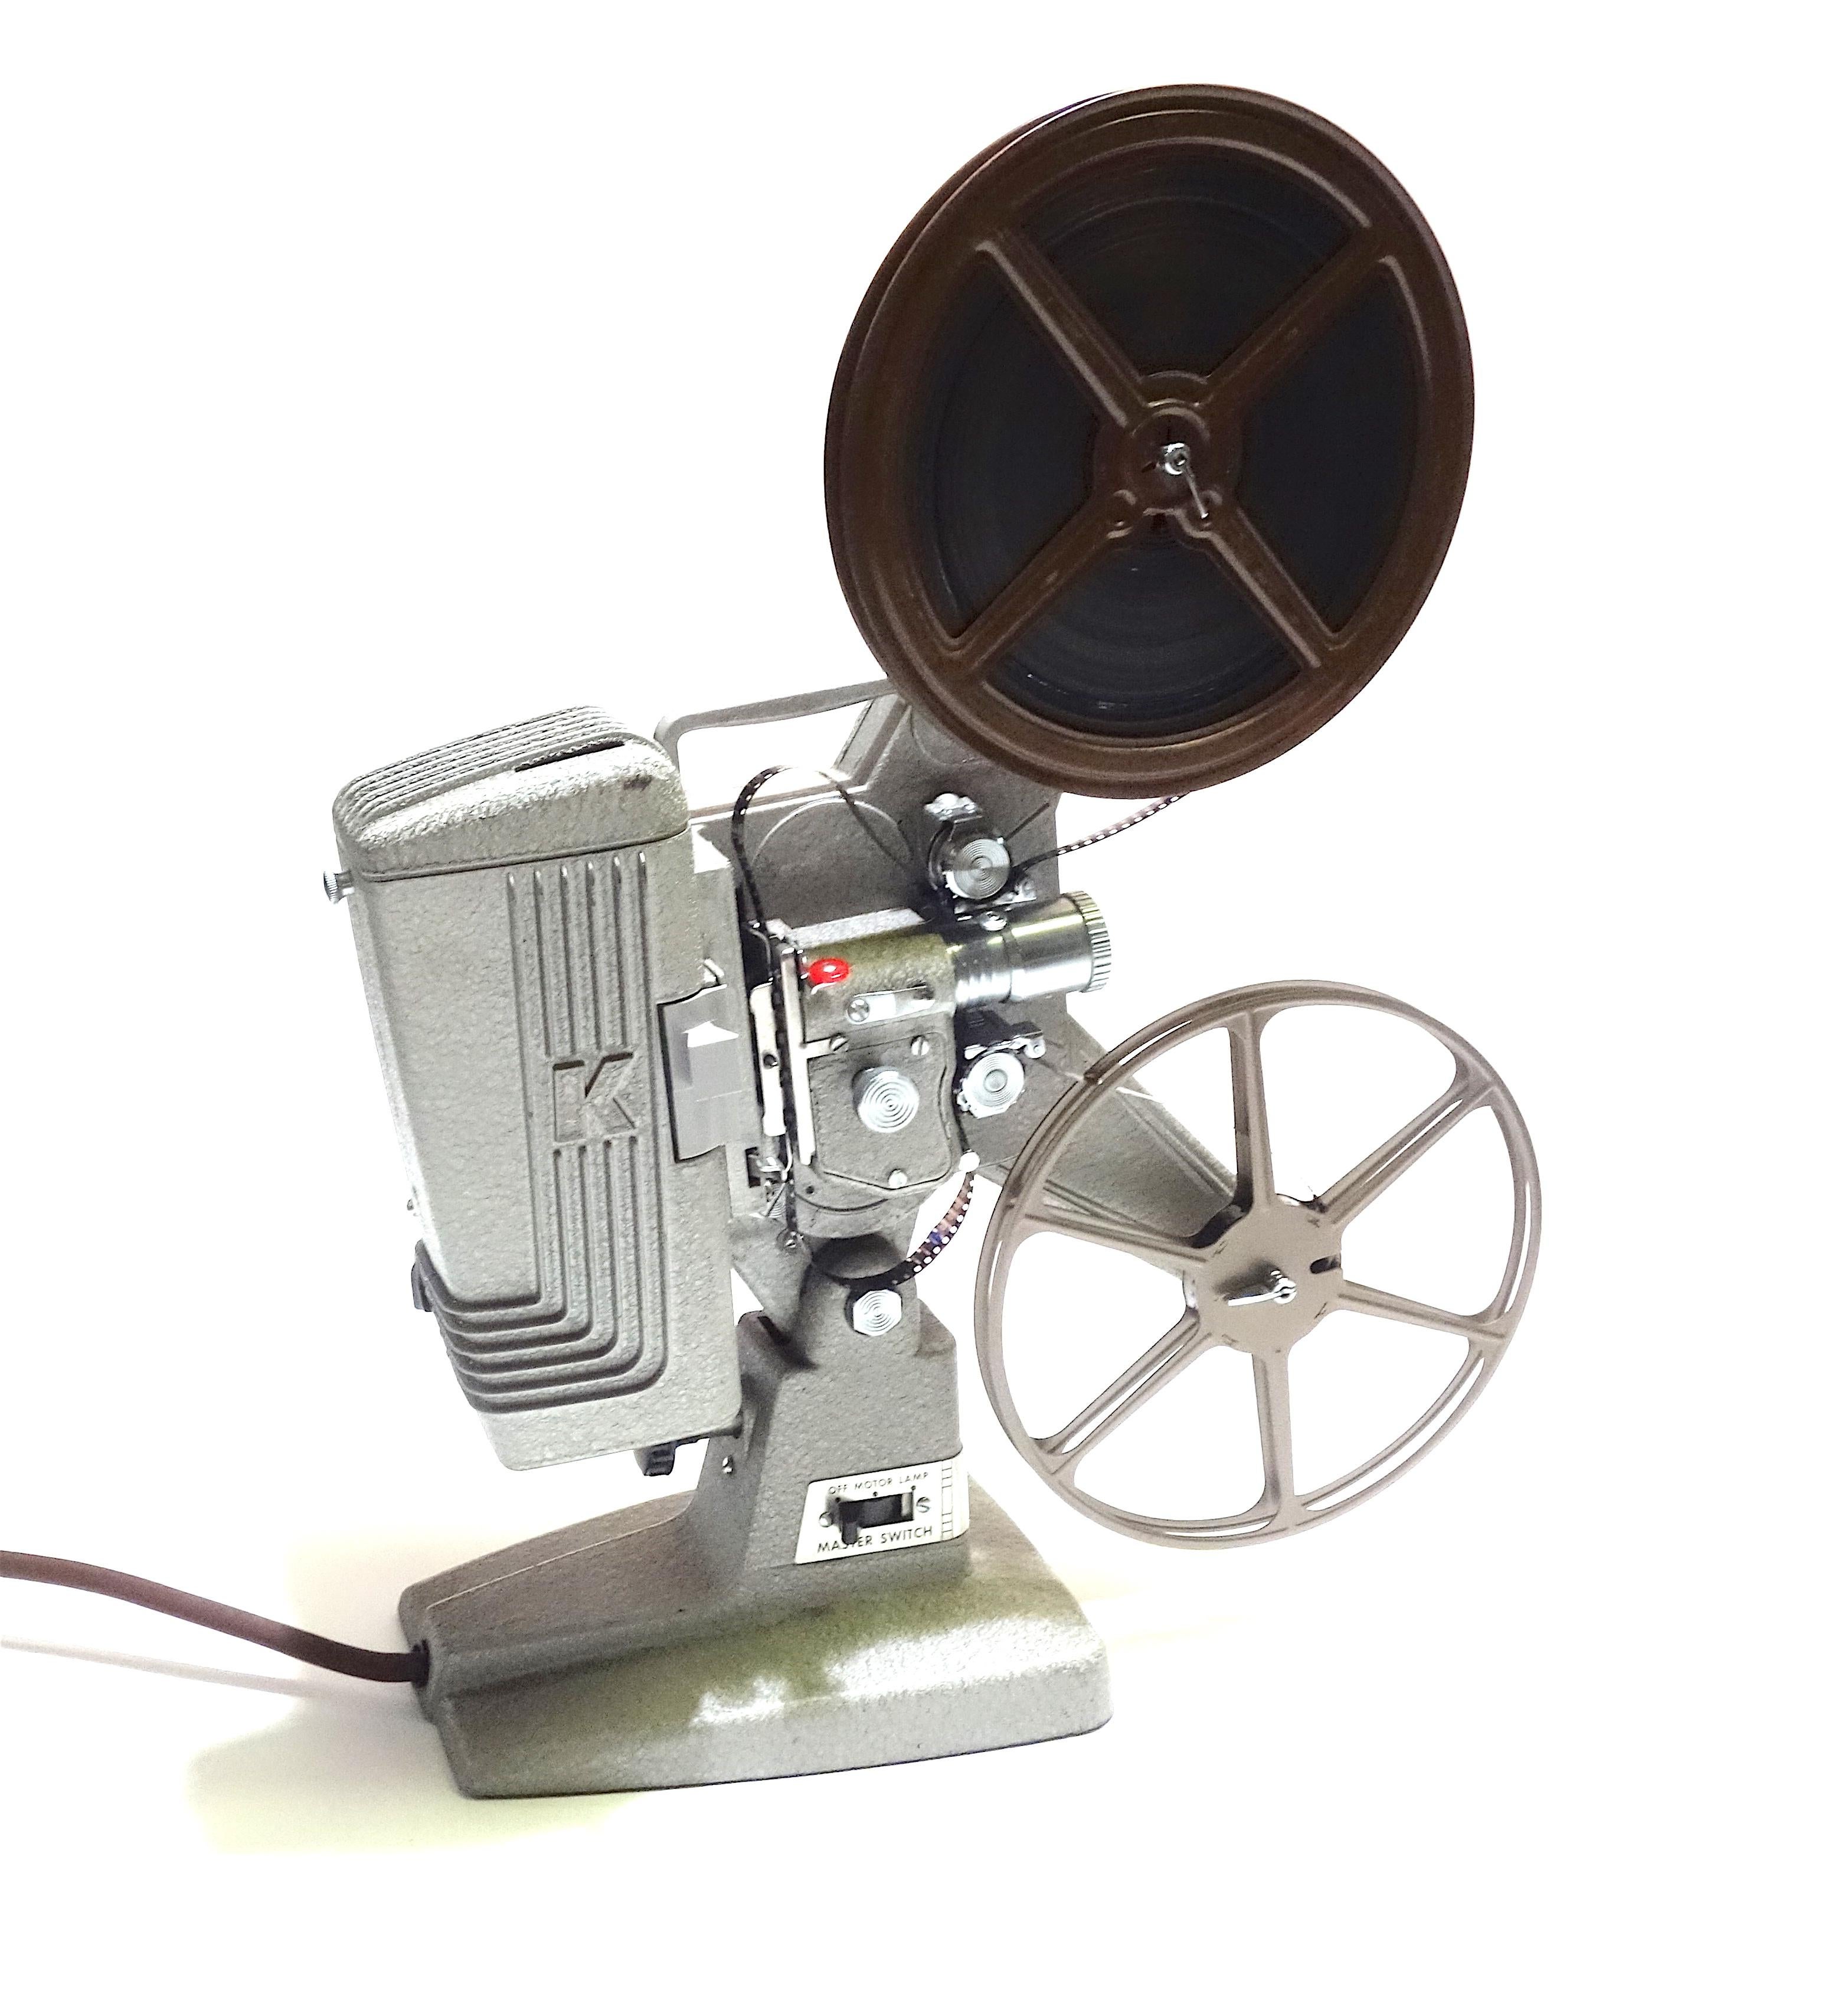 Submitted for your consideration is this circa 1950s Keystone 8mm movie projector in extremely rare pristine condition. 
The cinema projector looks as new and comes complete with a reel of film and a take up reel, power cord, factory lens and